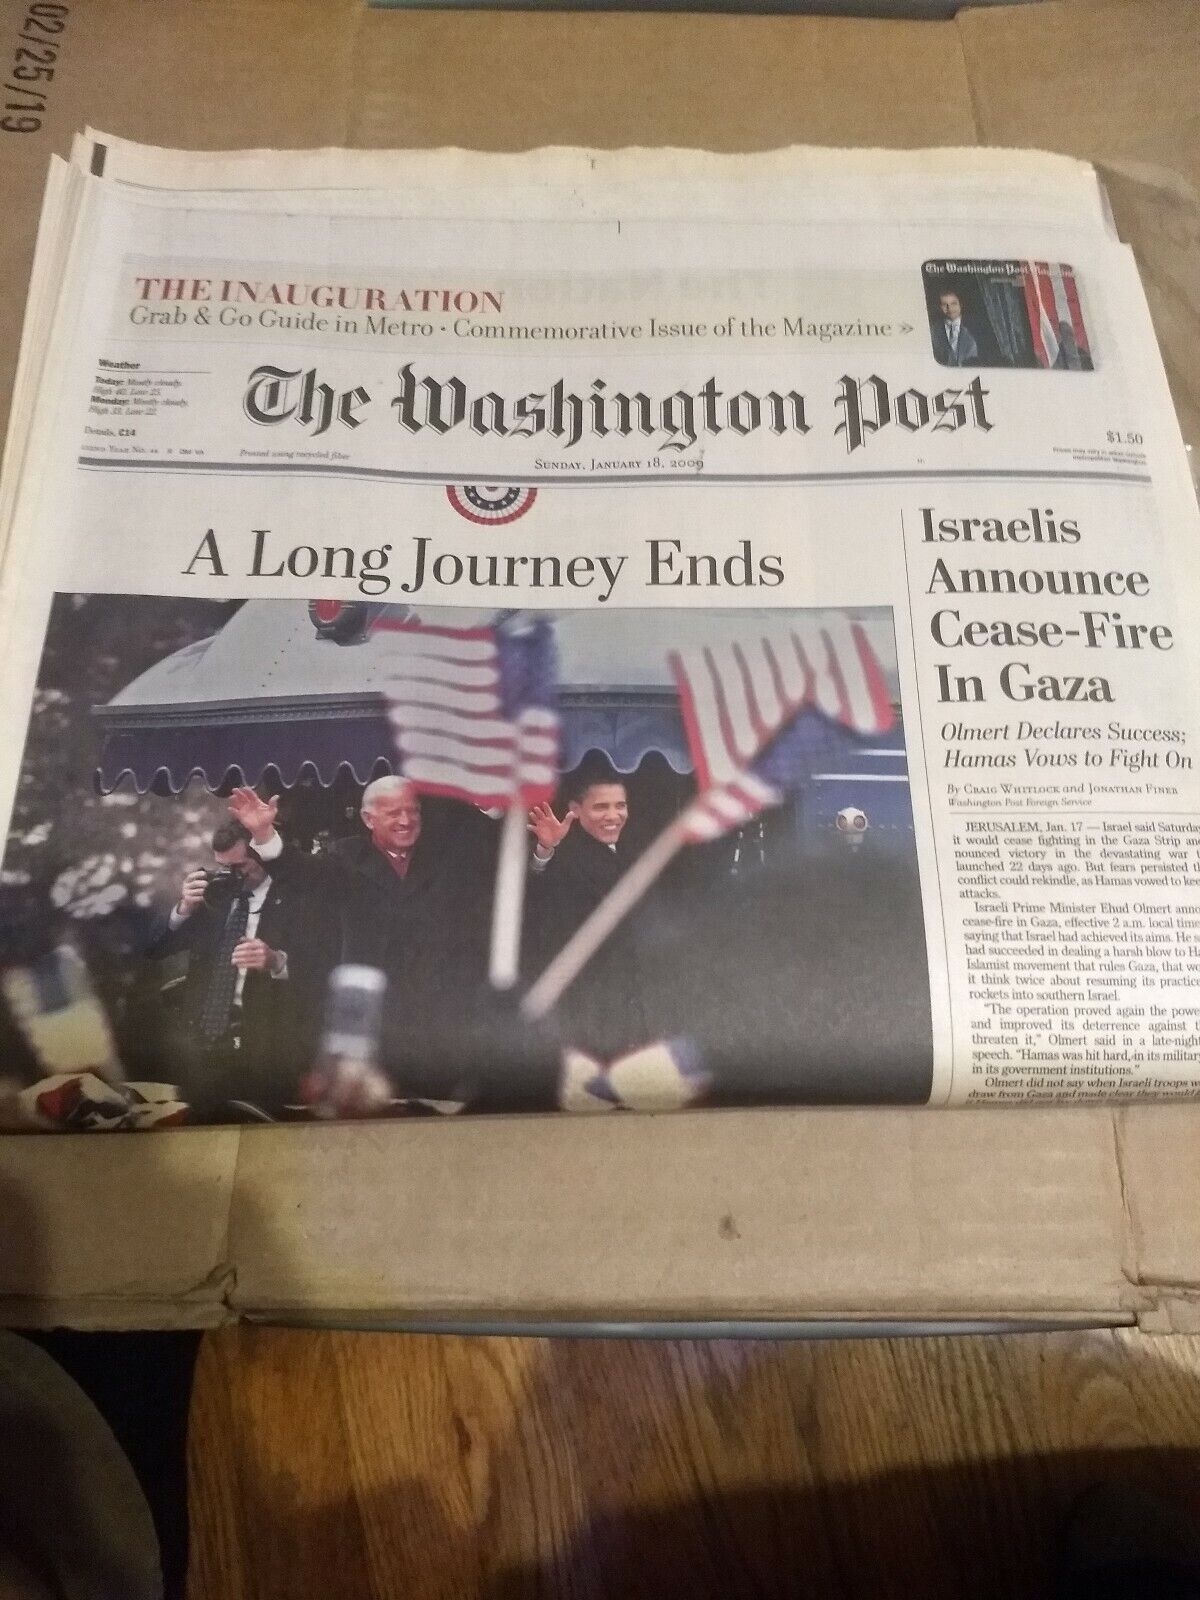 President Obama The Washington Post - A Long Journey ends - January 18th...